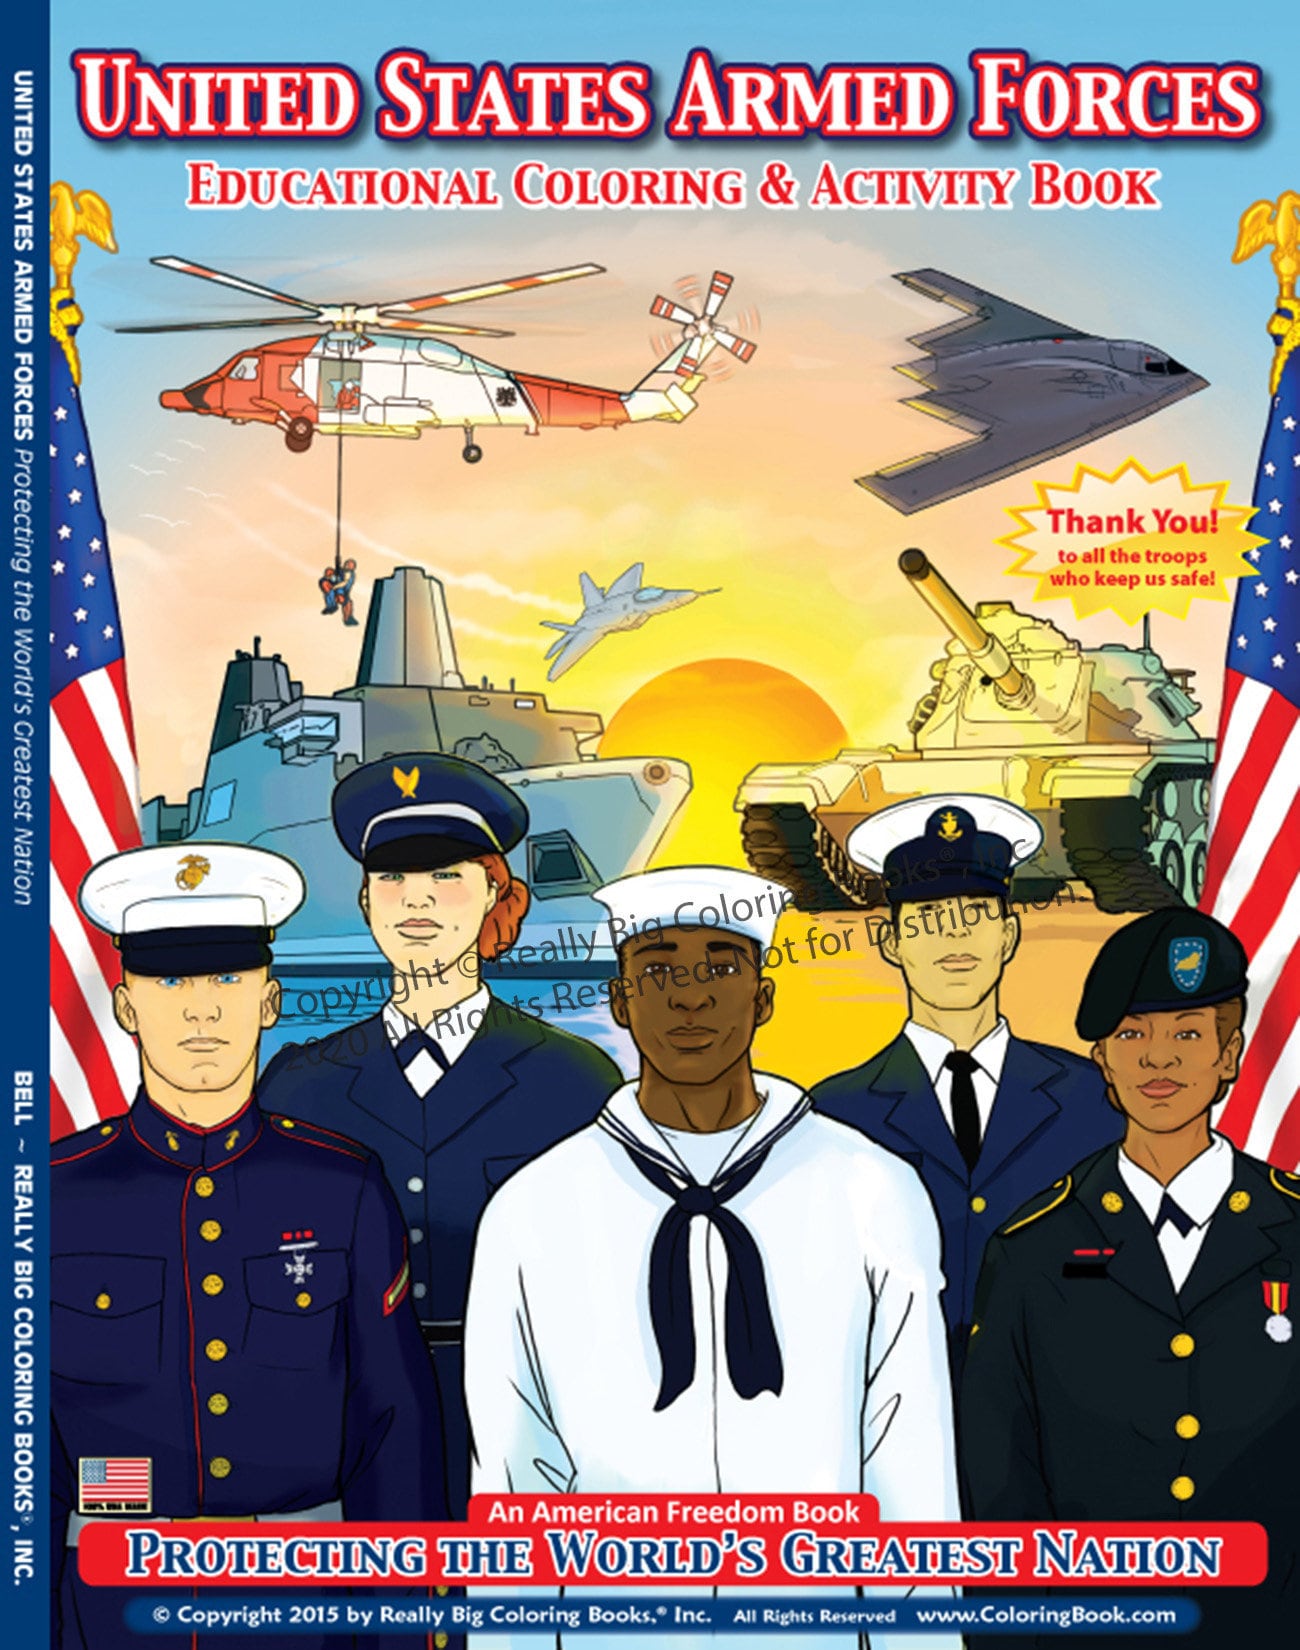 Army Coloring Book For Boys: Military Colouring Pages For Children:  Soldiers, Warships and Guns: Funny Gifts For Kids (Paperback), Octavia  Books